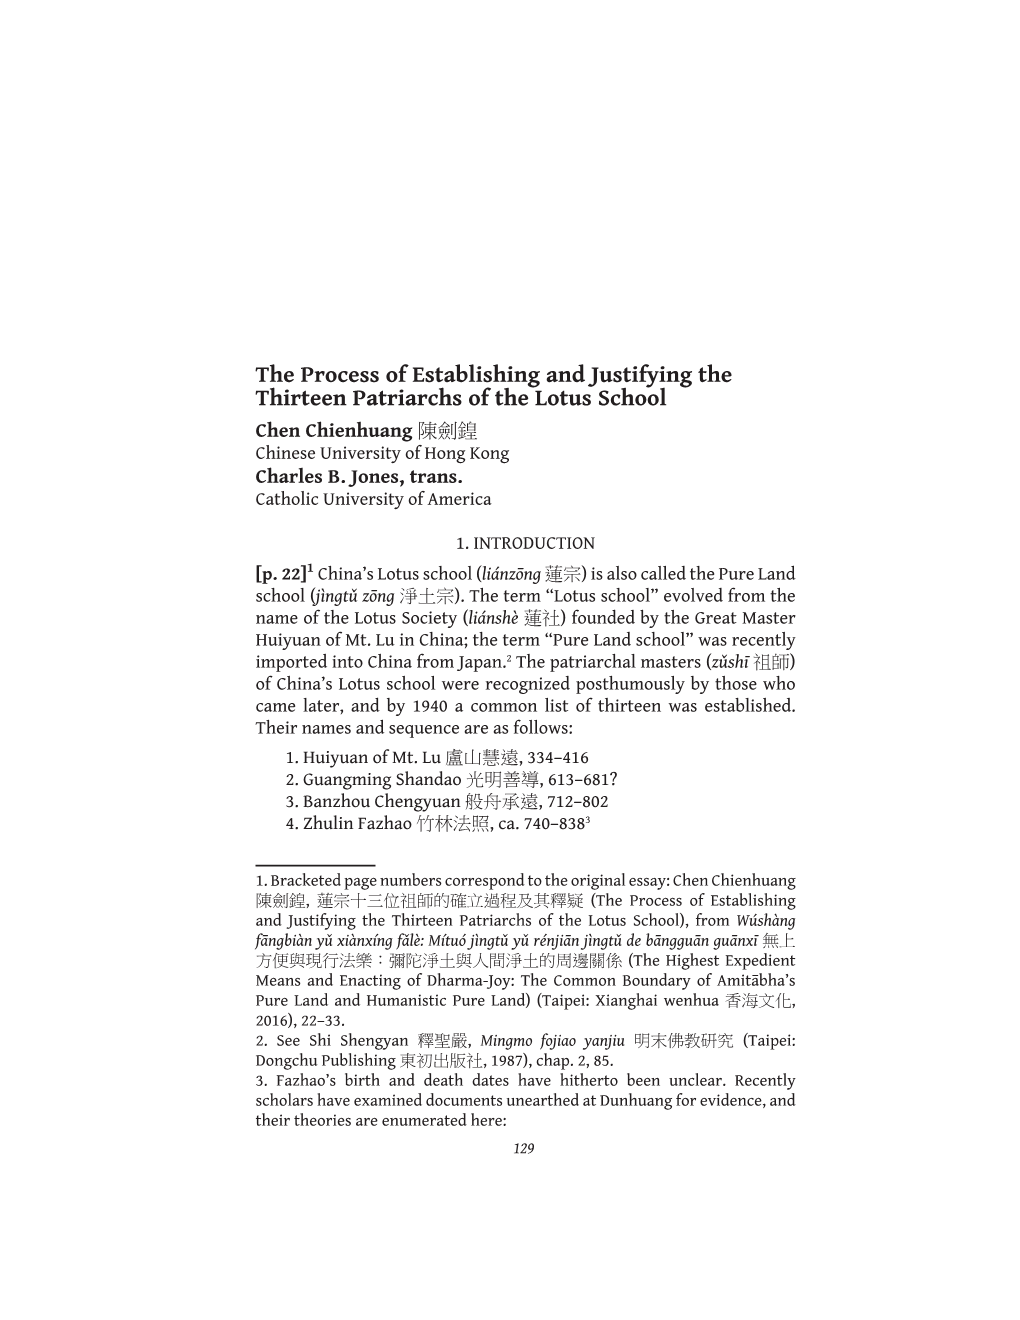 The Process of Establishing and Justifying the Thirteen Patriarchs of the Lotus School Chen Chienhuang 陳劍鍠 Chinese University of Hong Kong Charles B